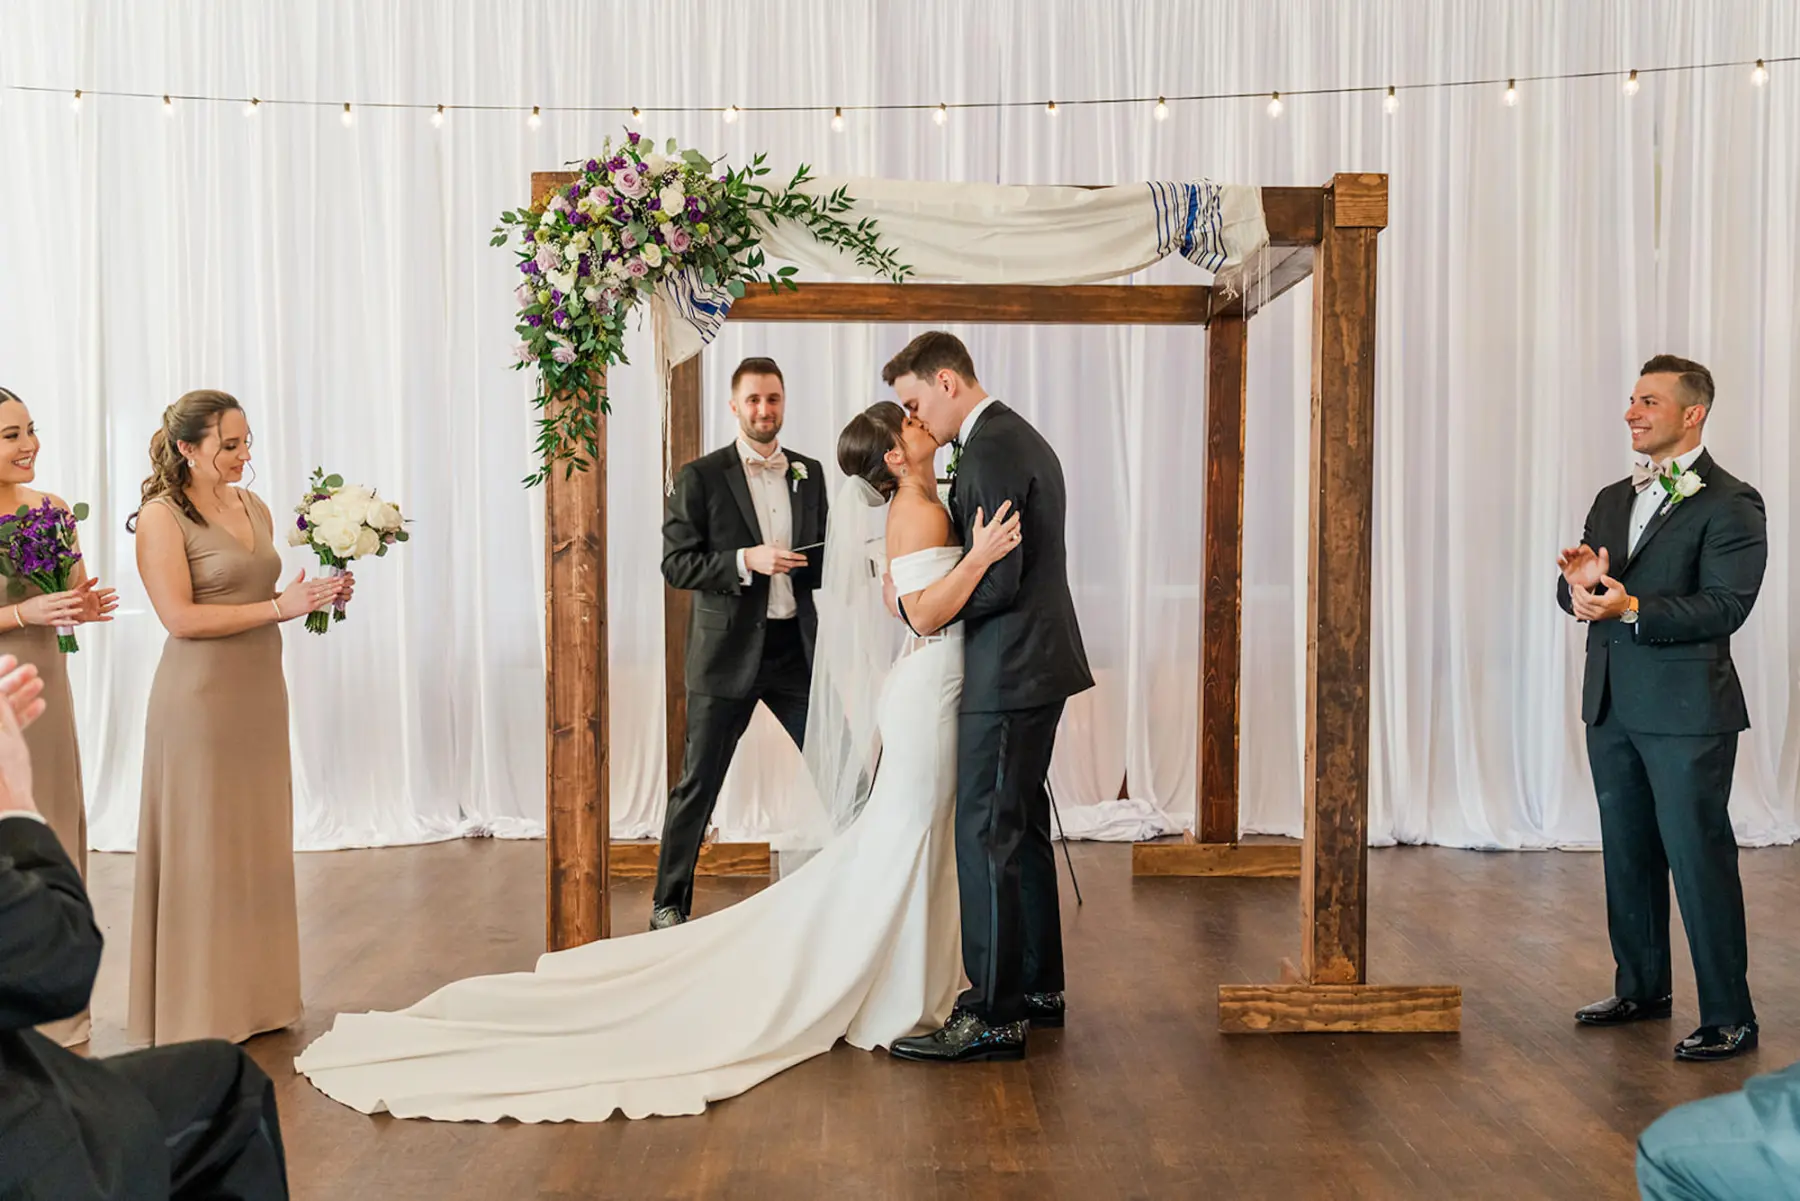 Elegant Wooden Wedding Jewish Ceremony Chuppah Arch with Purple Spring Floral Inspiration | Bride and Groom Kiss